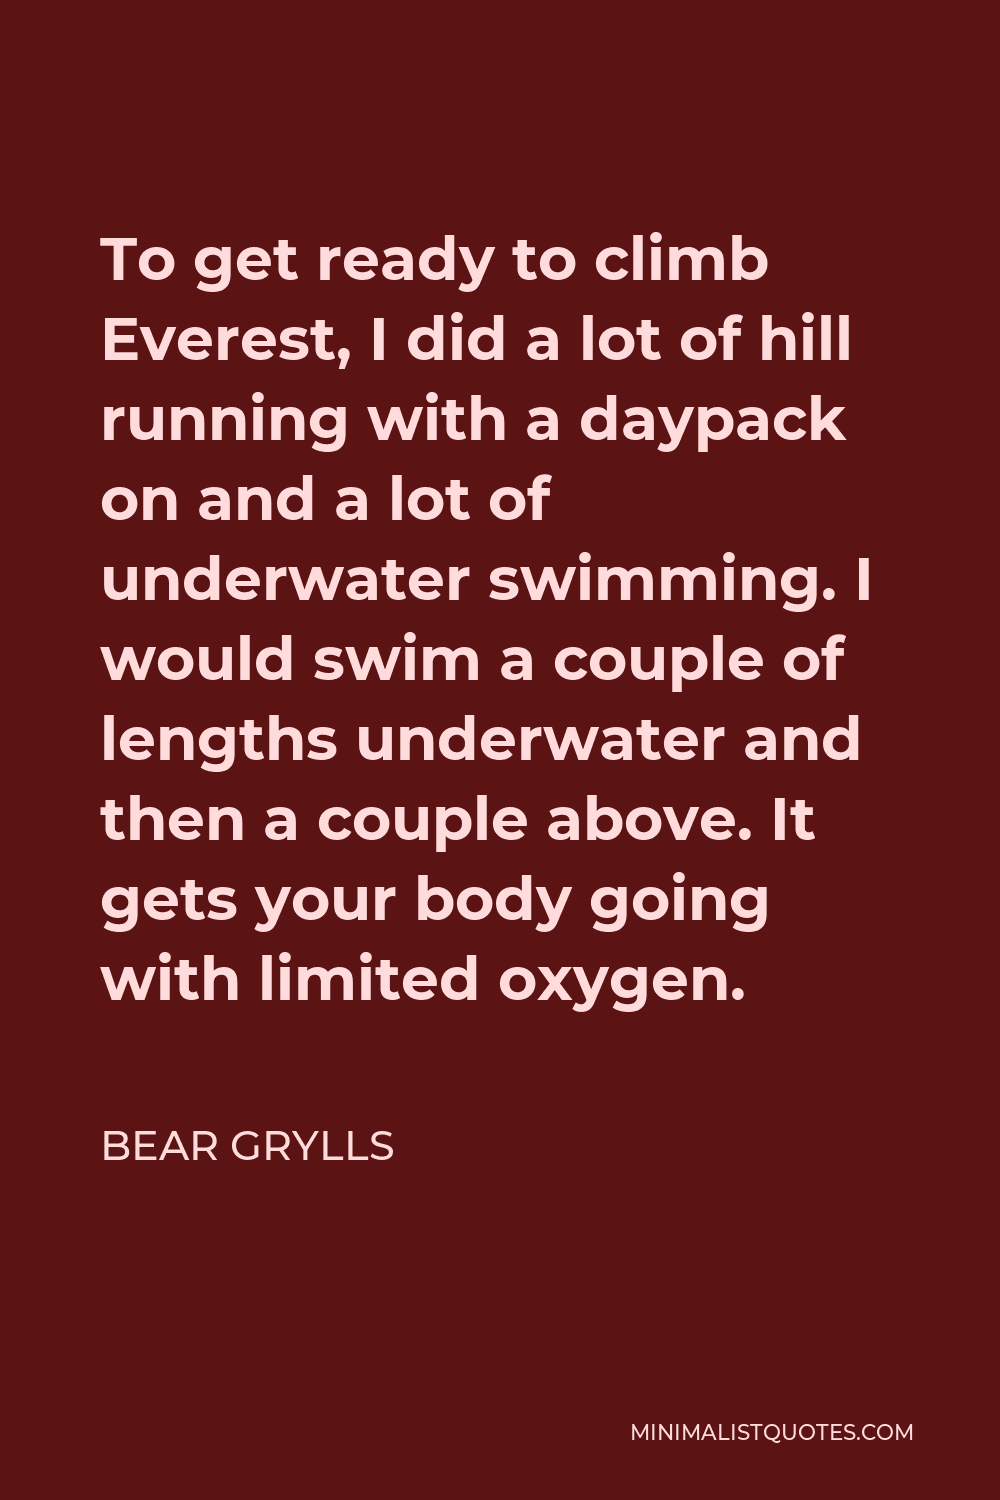 Bear Grylls Quote - To get ready to climb Everest, I did a lot of hill running with a daypack on and a lot of underwater swimming. I would swim a couple of lengths underwater and then a couple above. It gets your body going with limited oxygen.